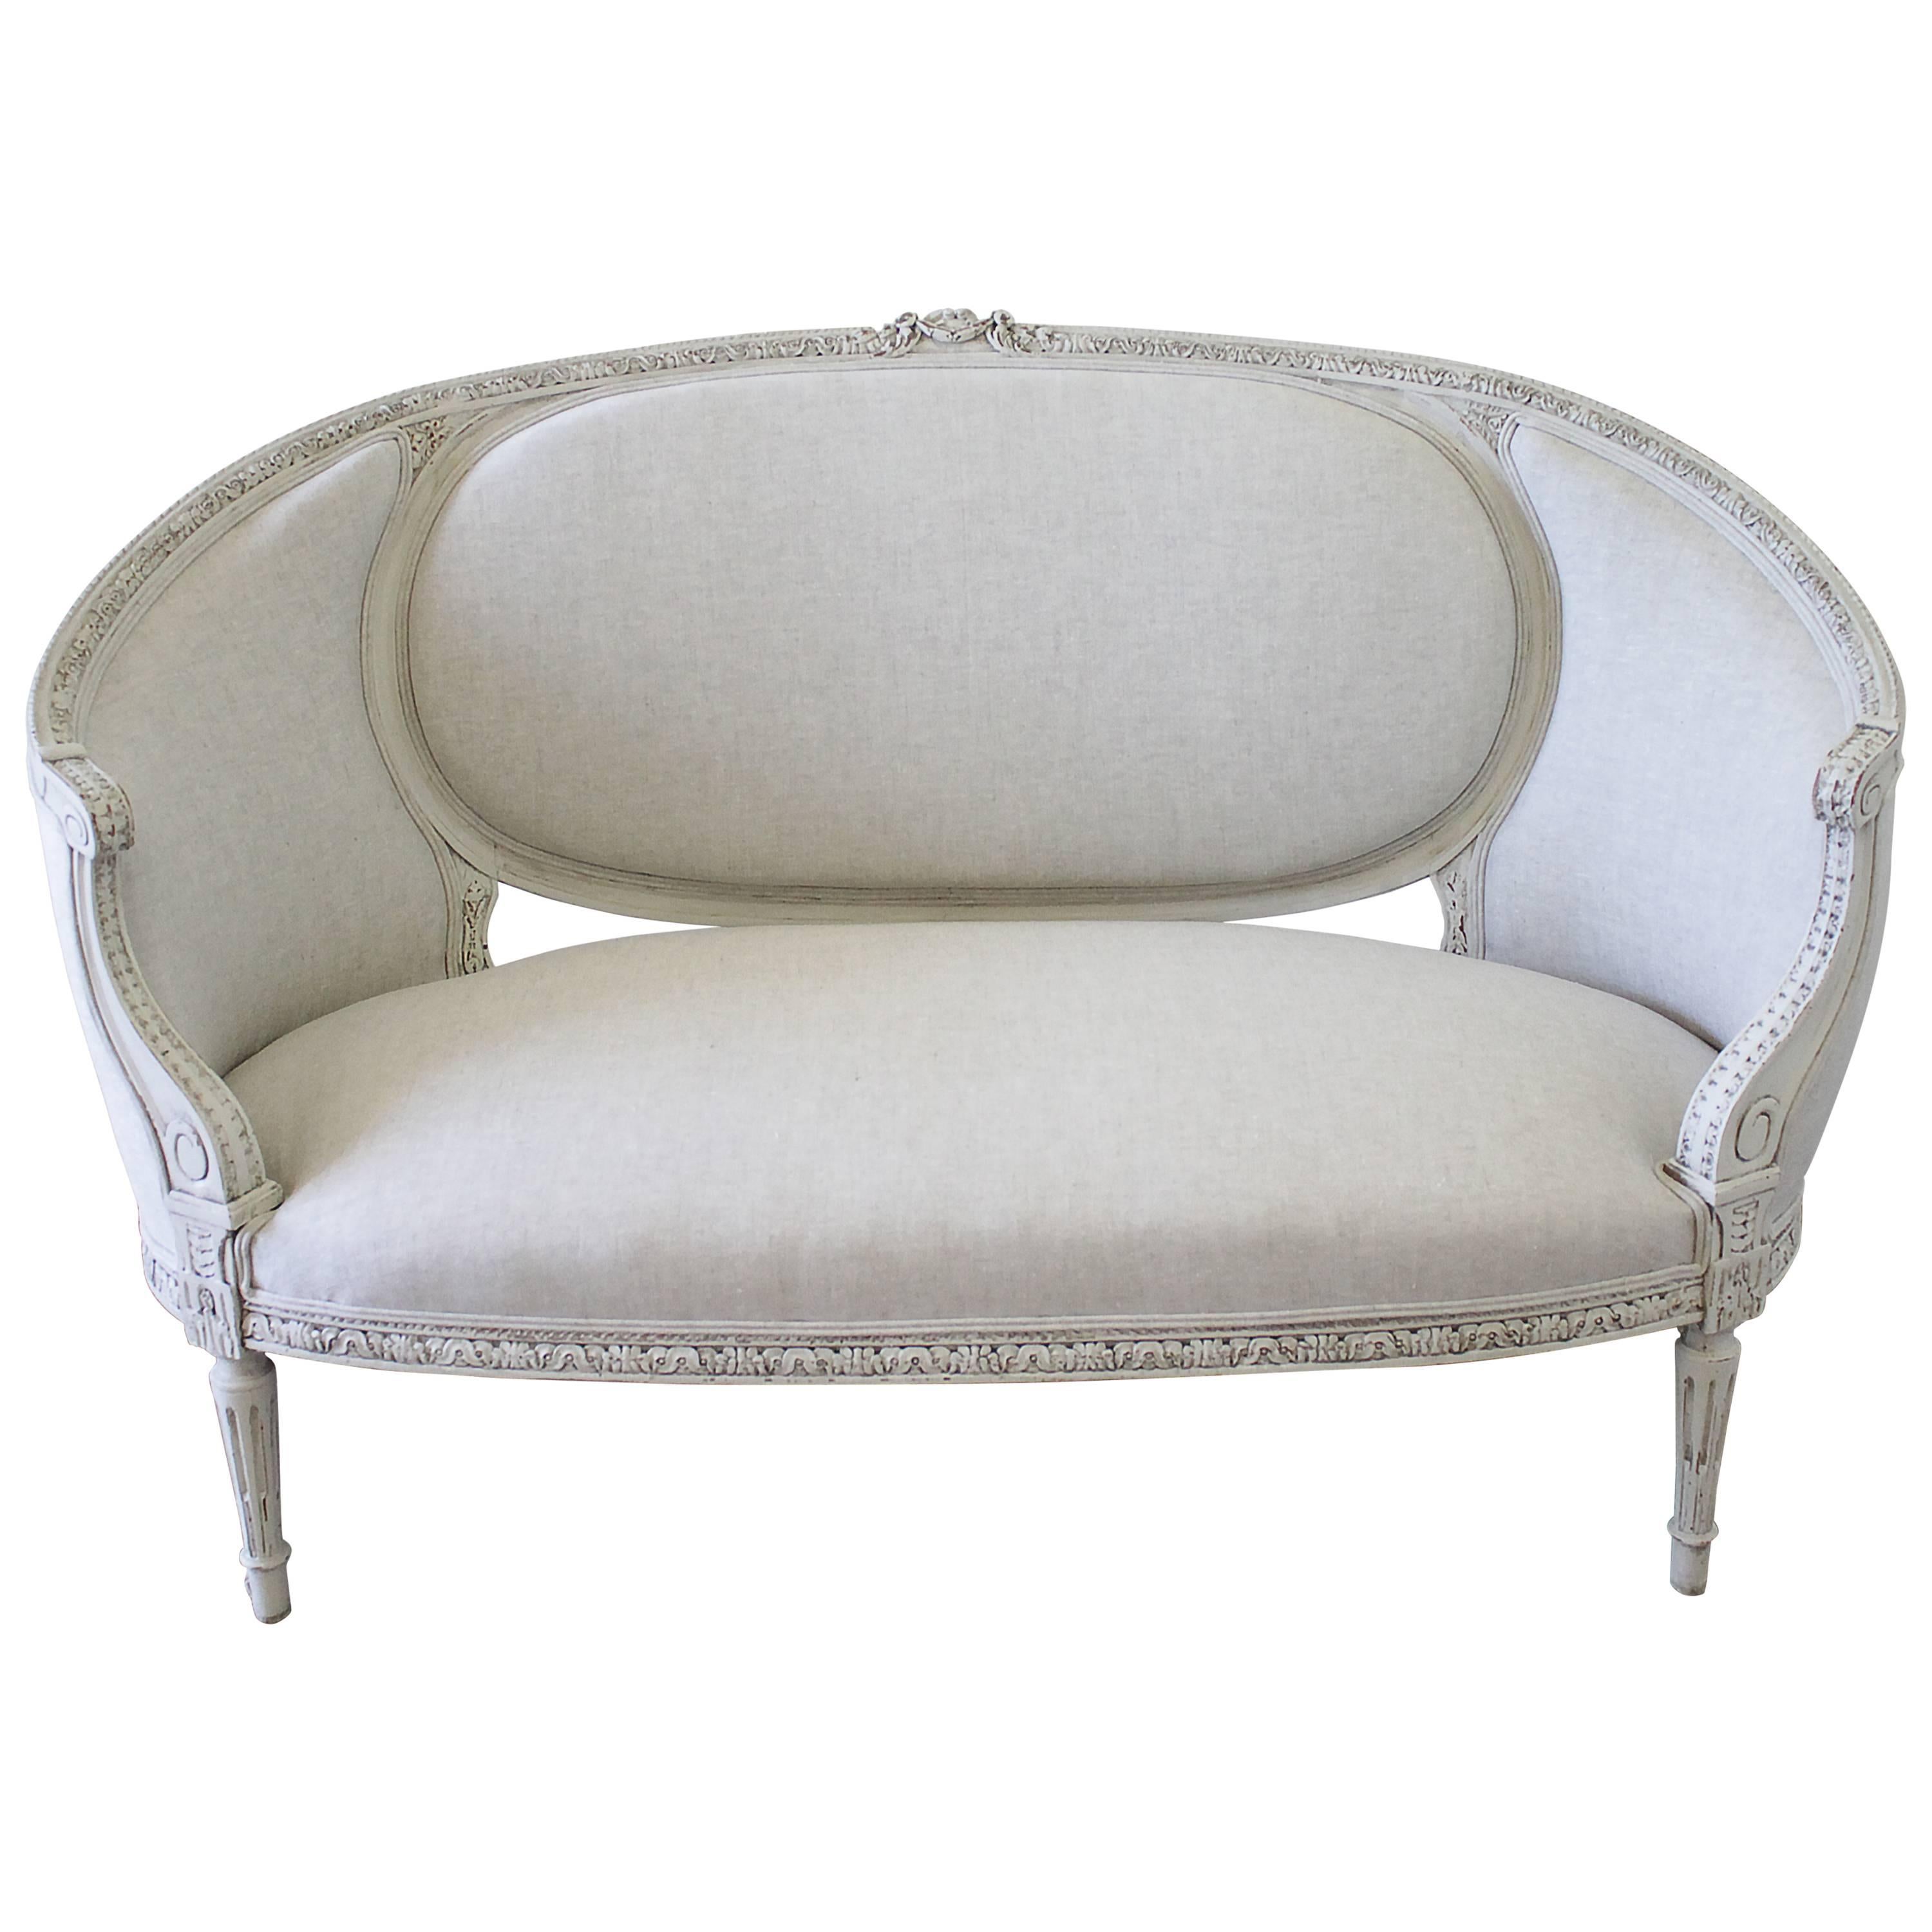 French Louis XVI Style Carved Painted Antique Canape Settee Sofa, 19th Century